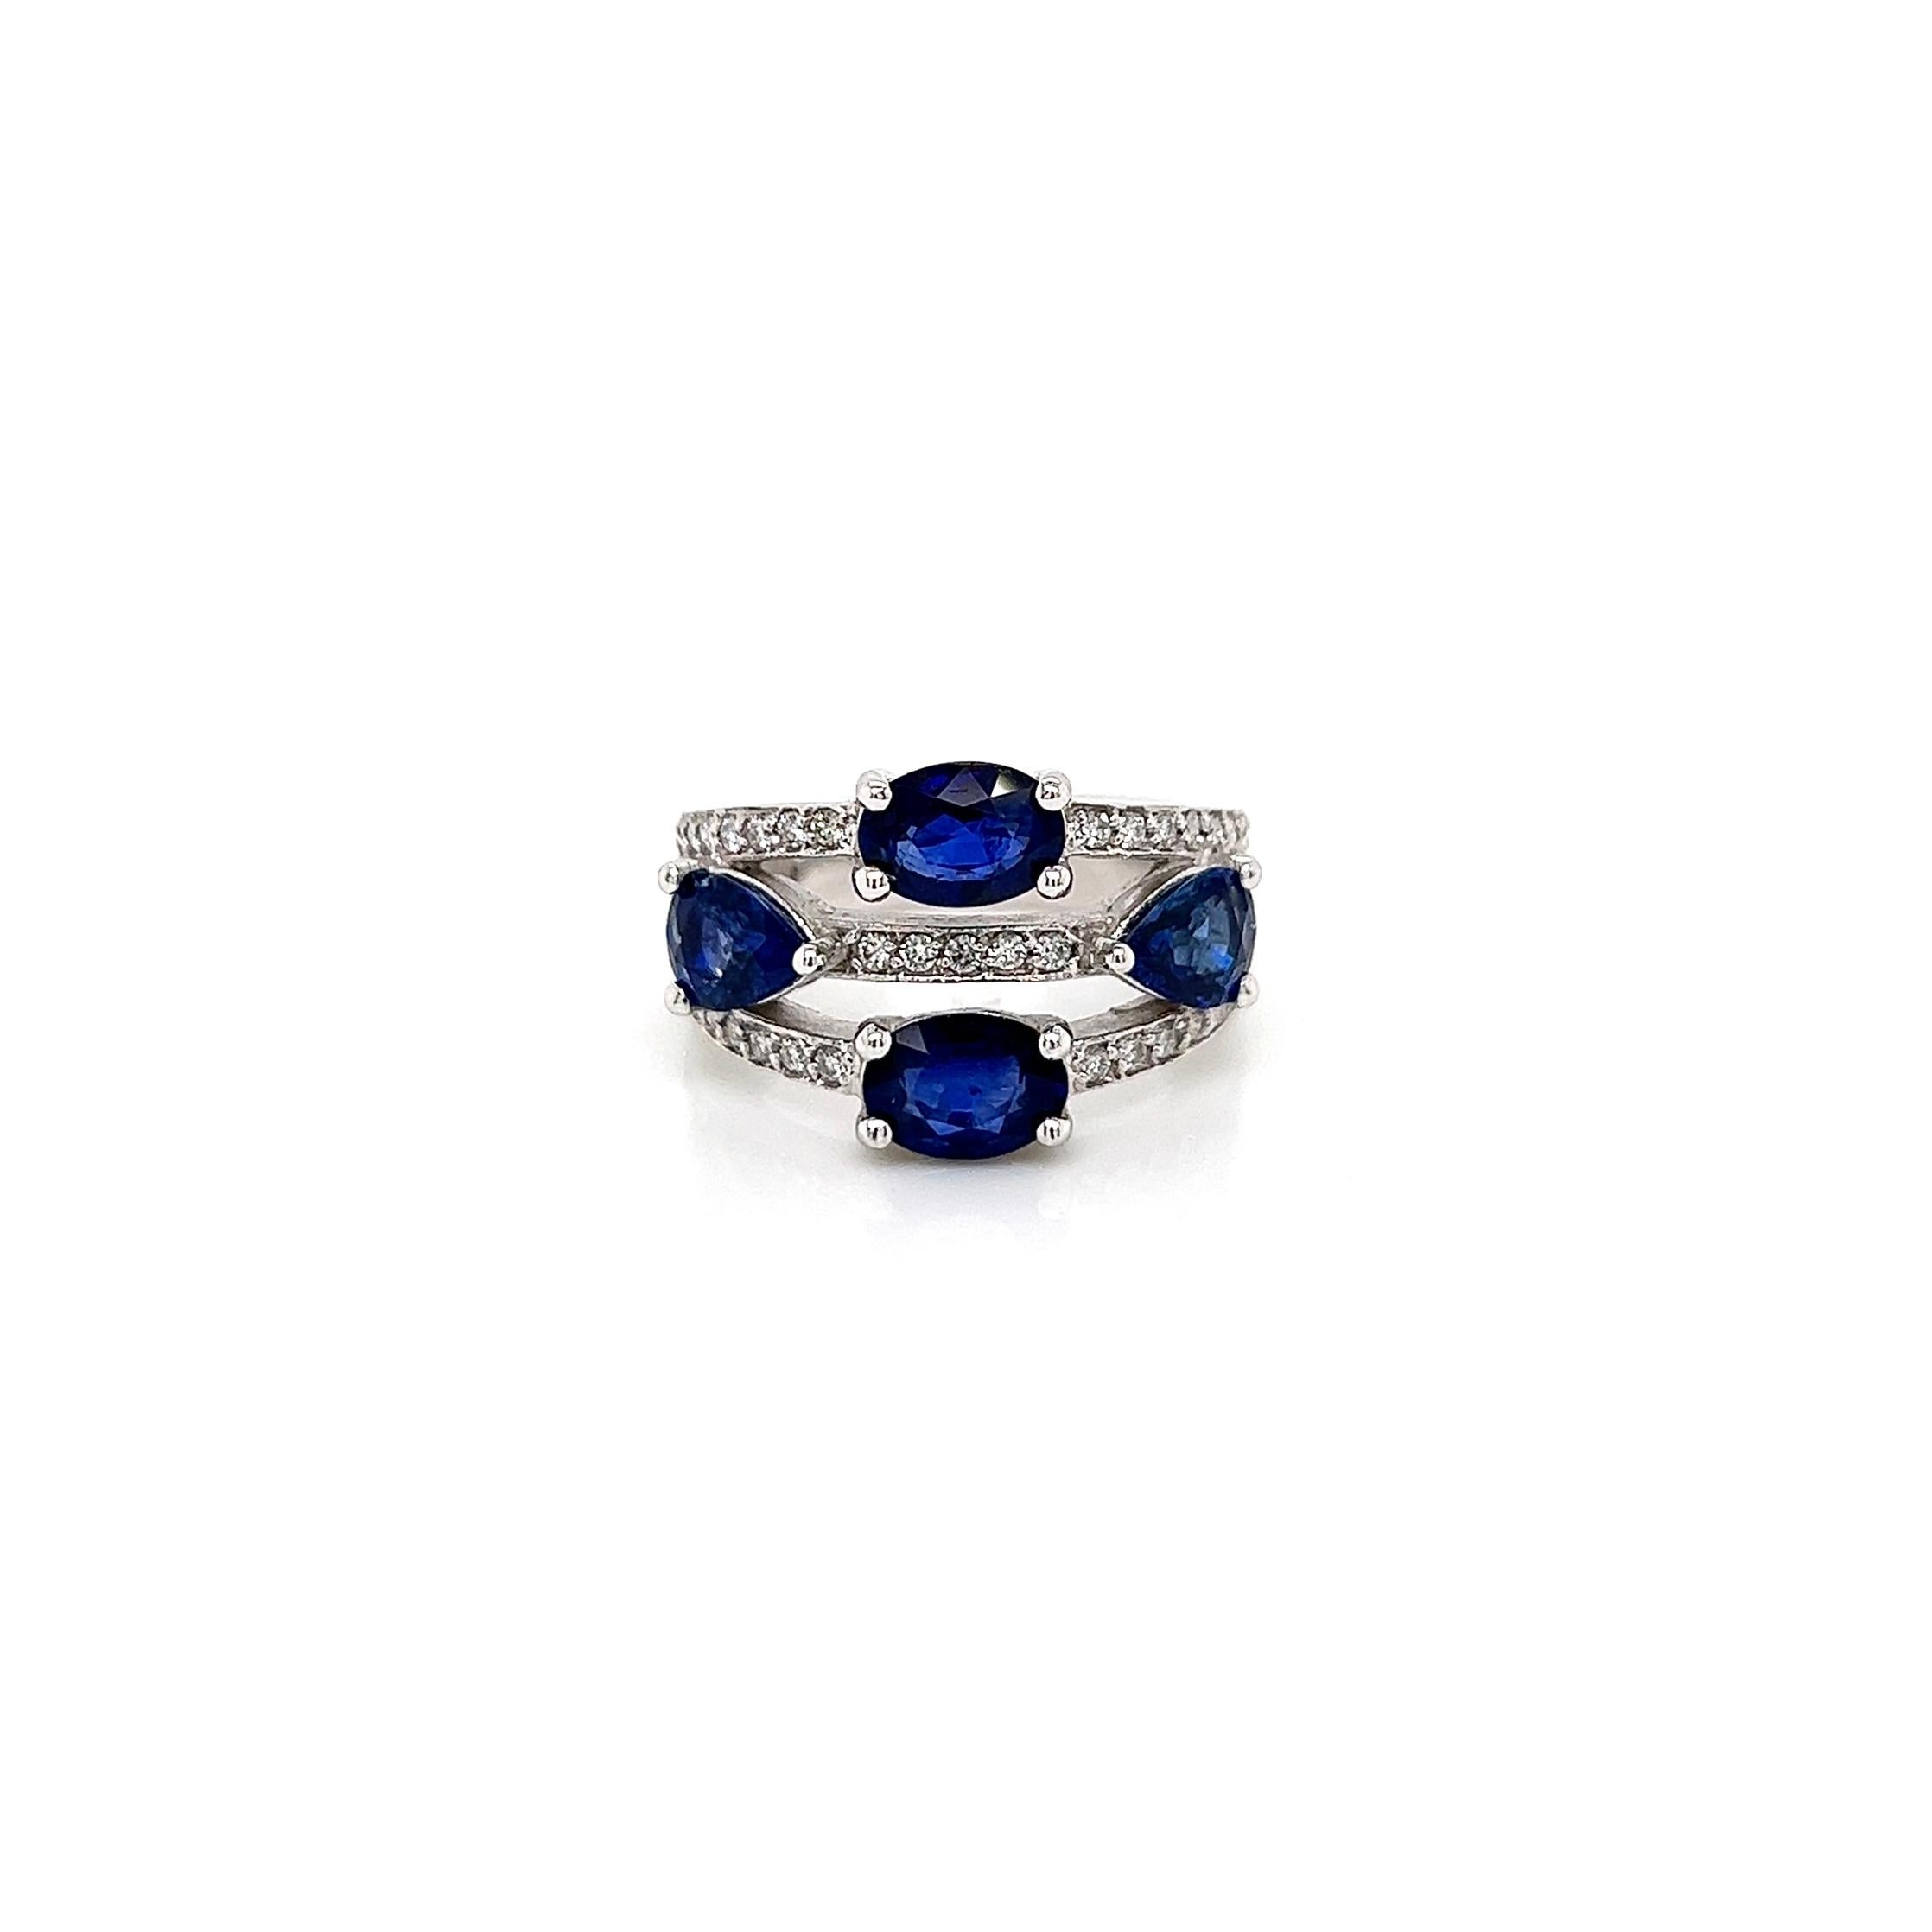 3.71 Total Carat Sapphire Diamond Ladies Ring

-Metal Type: 14K White Gold
-3.17 Carat Pear Shaped and Oval Blue Sapphires
-0.54 Carat Round Side Diamonds, F-G color, VS-SI clarity
-Size 7.25

Made in New York City.